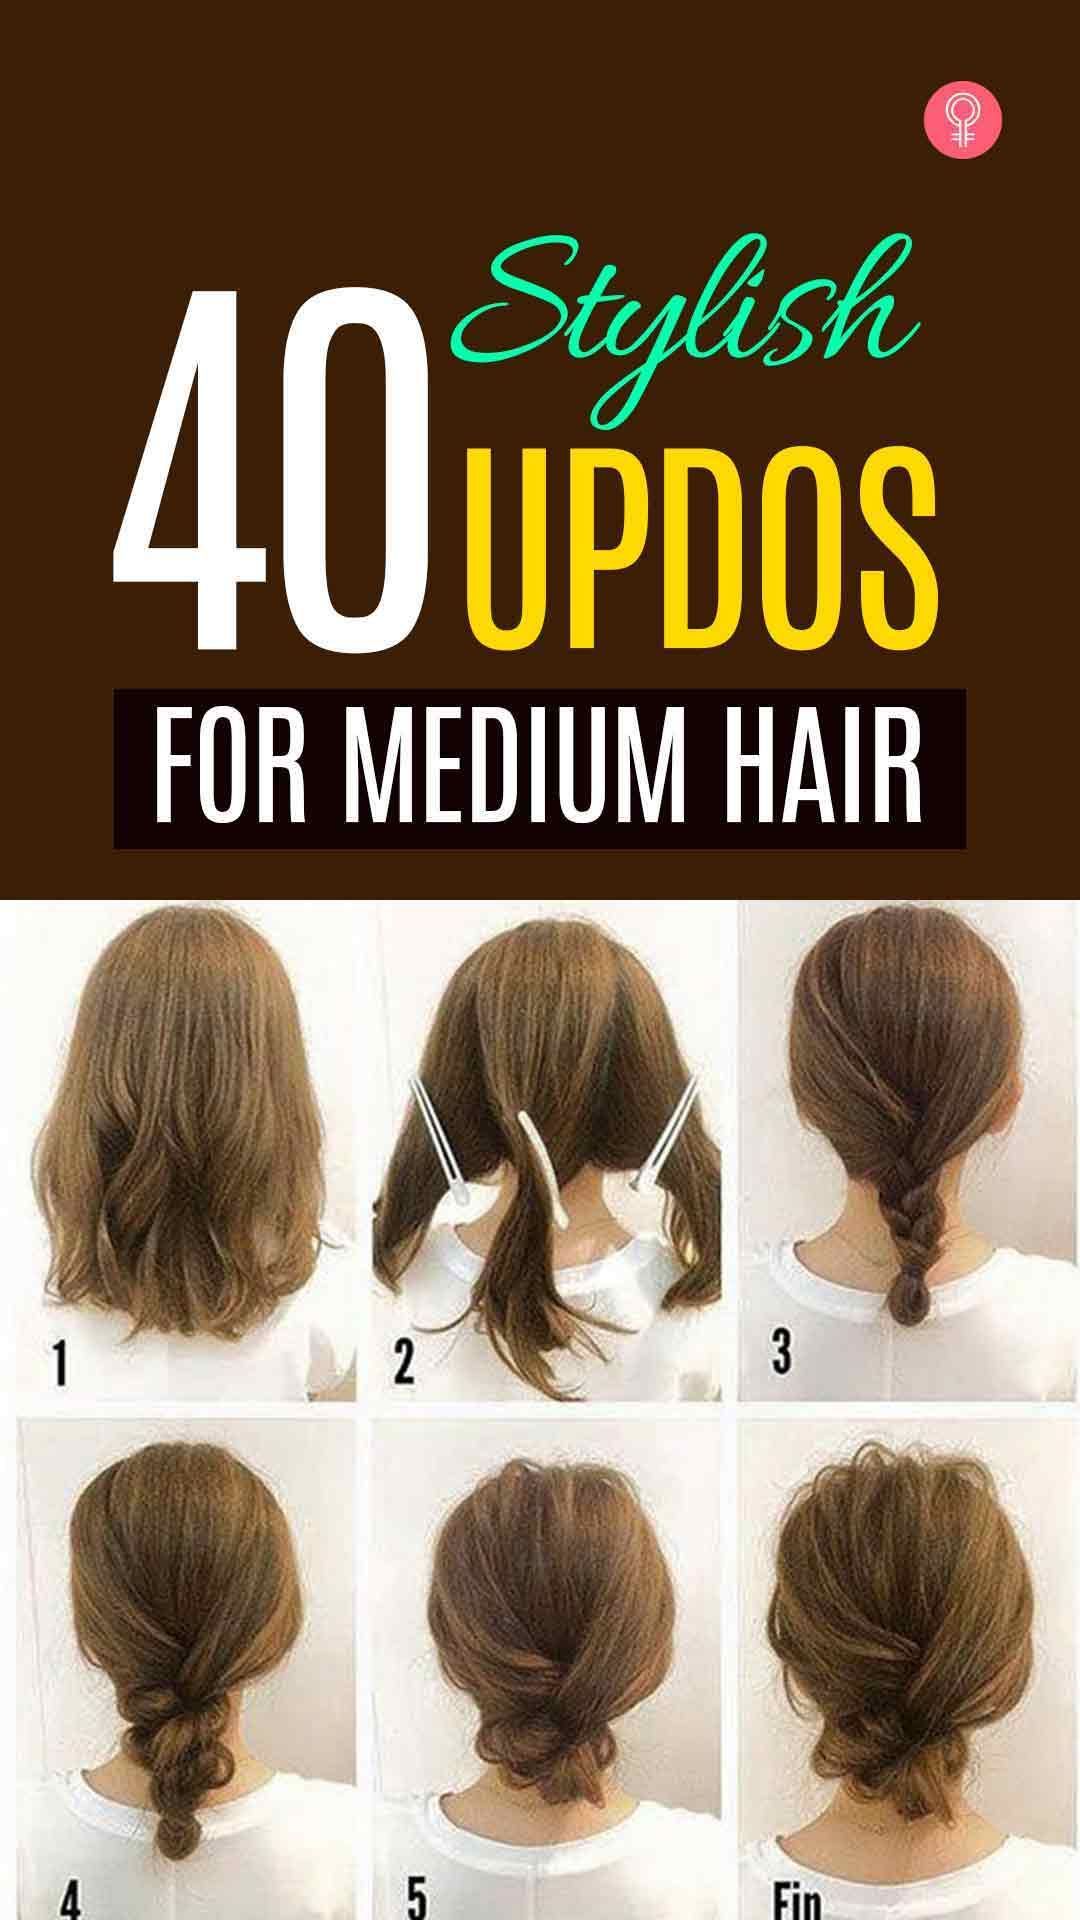 40 Quick And Easy Updos For Medium Hair -   17 easy hair Tips ideas